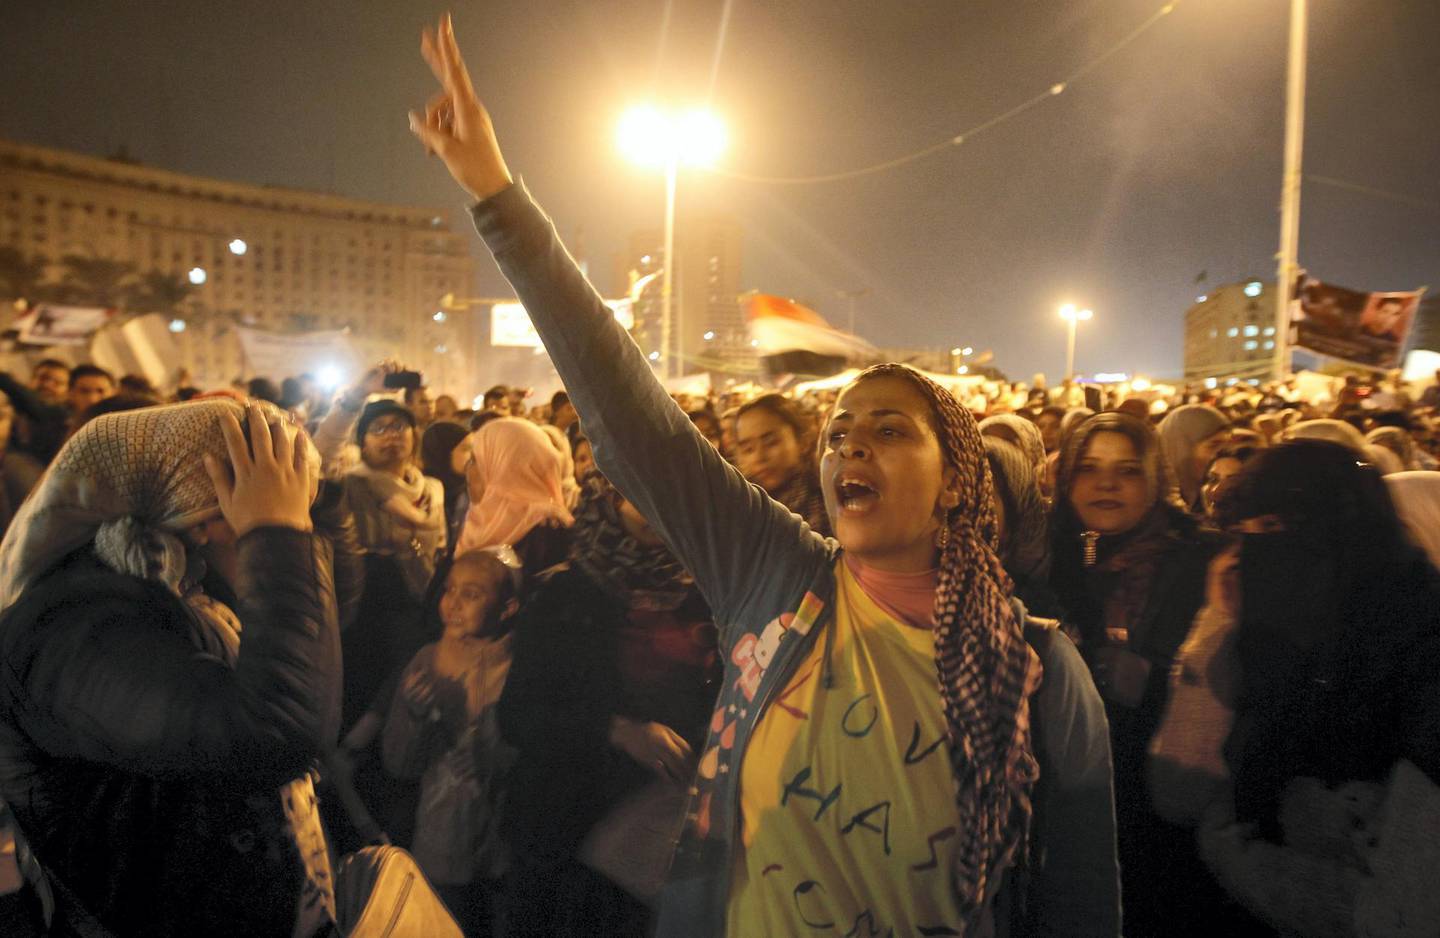 Egyptian women join a mass protest in Cairo's Tahrir square on November 24, 2011, as members of Egypt's ruling military council rejected calls to step down immediately, saying it would amount to a "betrayal" as anti-military protests entered their seventh day.  AFP PHOTO/MAHMUD HAMS (Photo by MAHMUD HAMS / AFP)